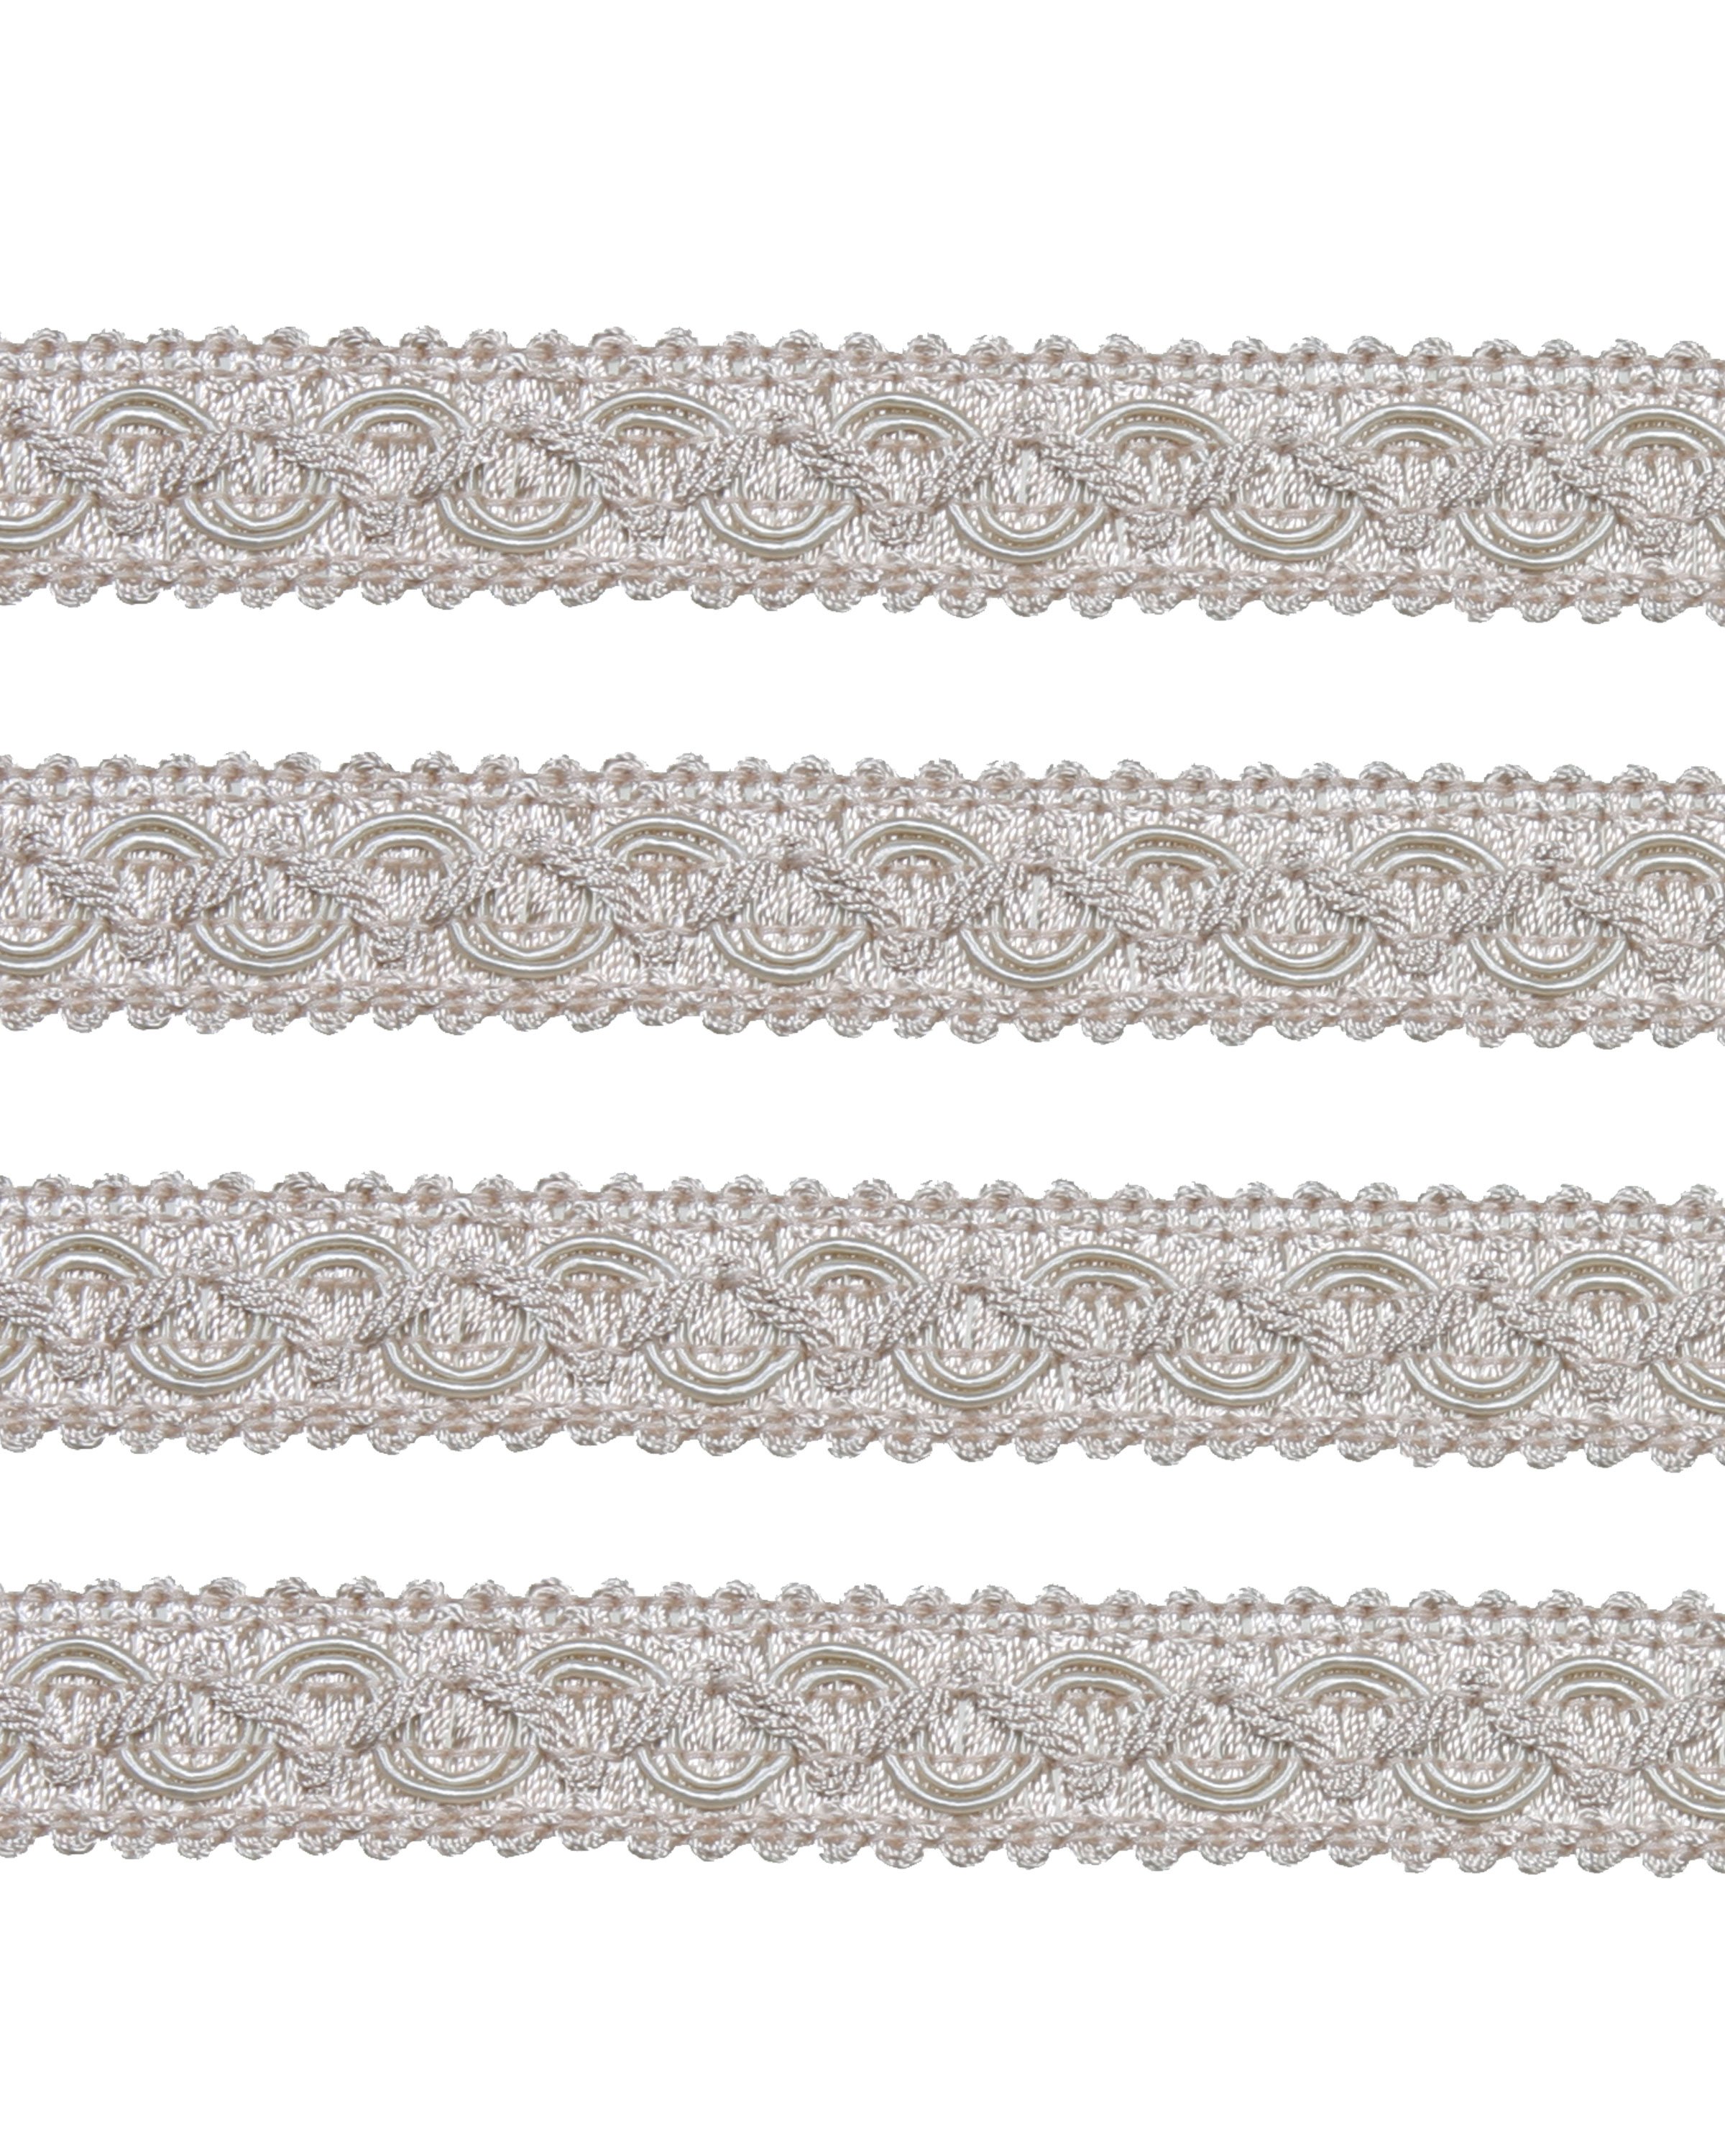 Ornate Braid - Cream / Gold 22mm Price is for 5 metres